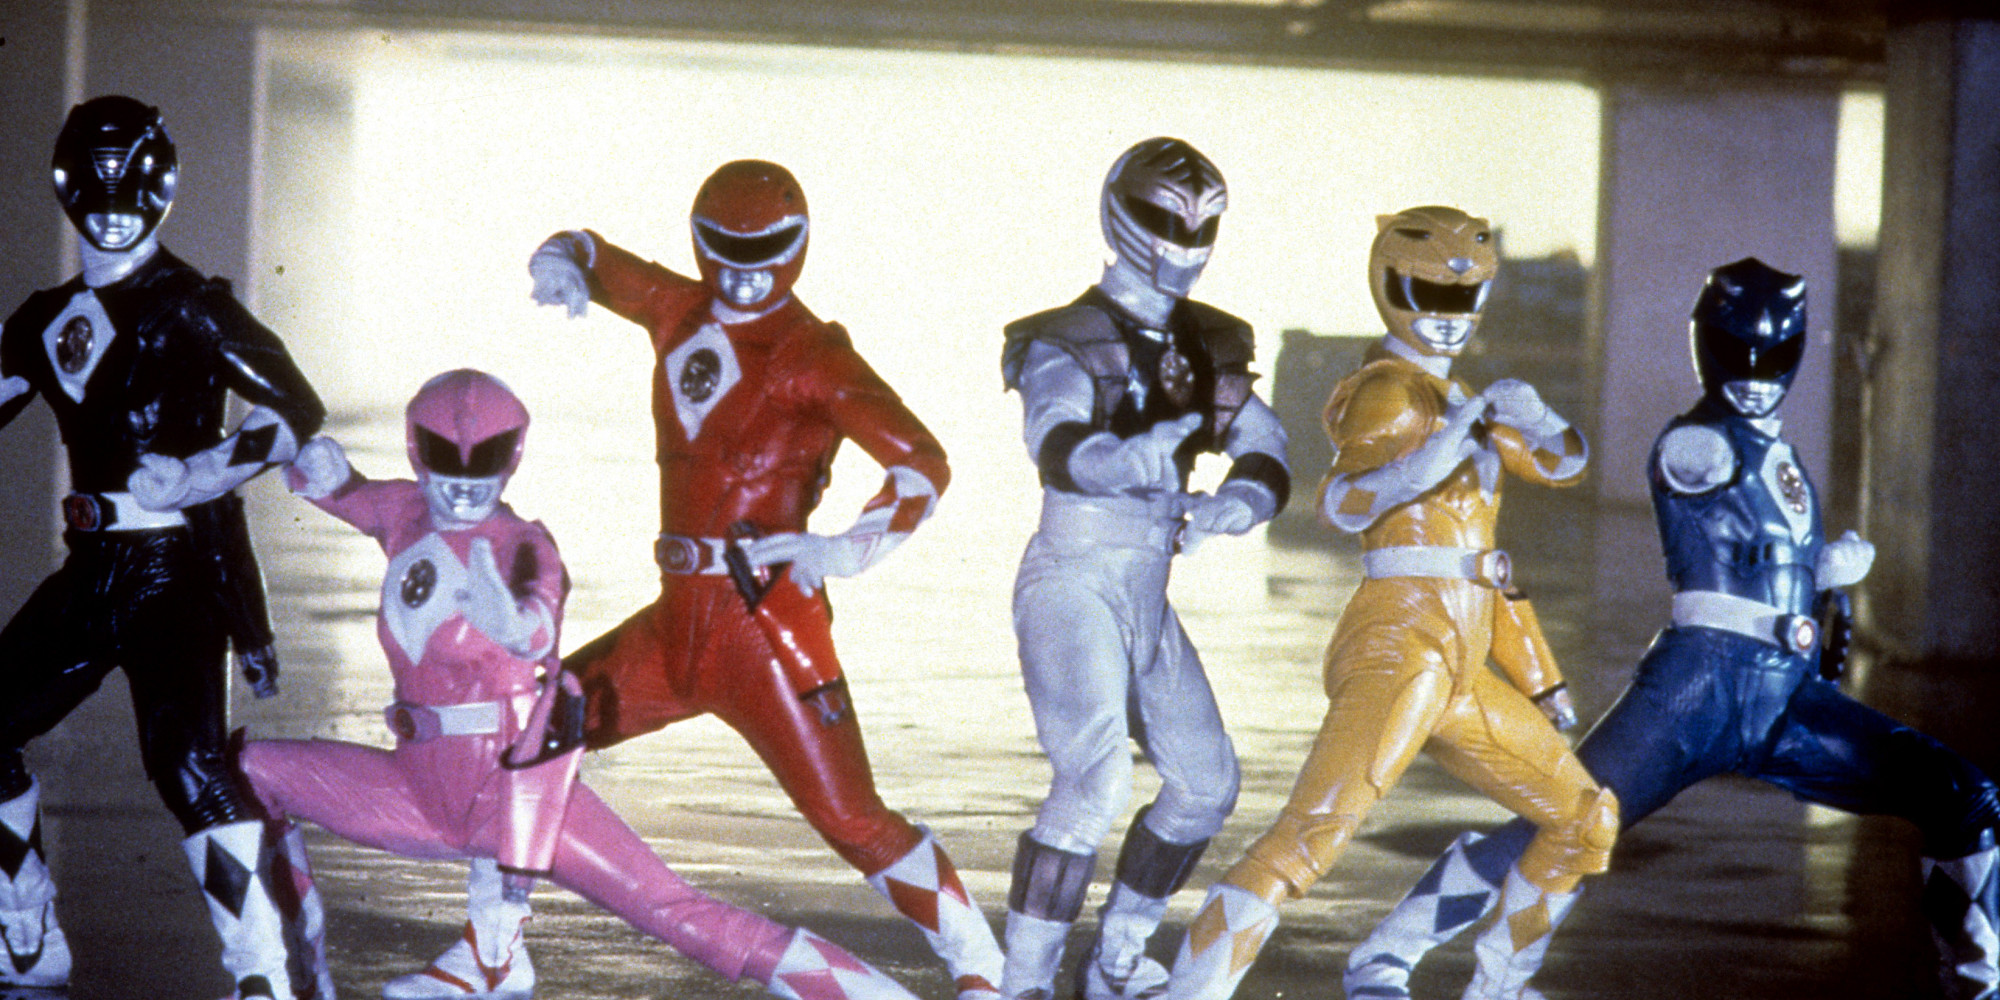 Mighty Morphin Power Rangers: The Movie Backgrounds, Compatible - PC, Mobile, Gadgets| 2000x1000 px